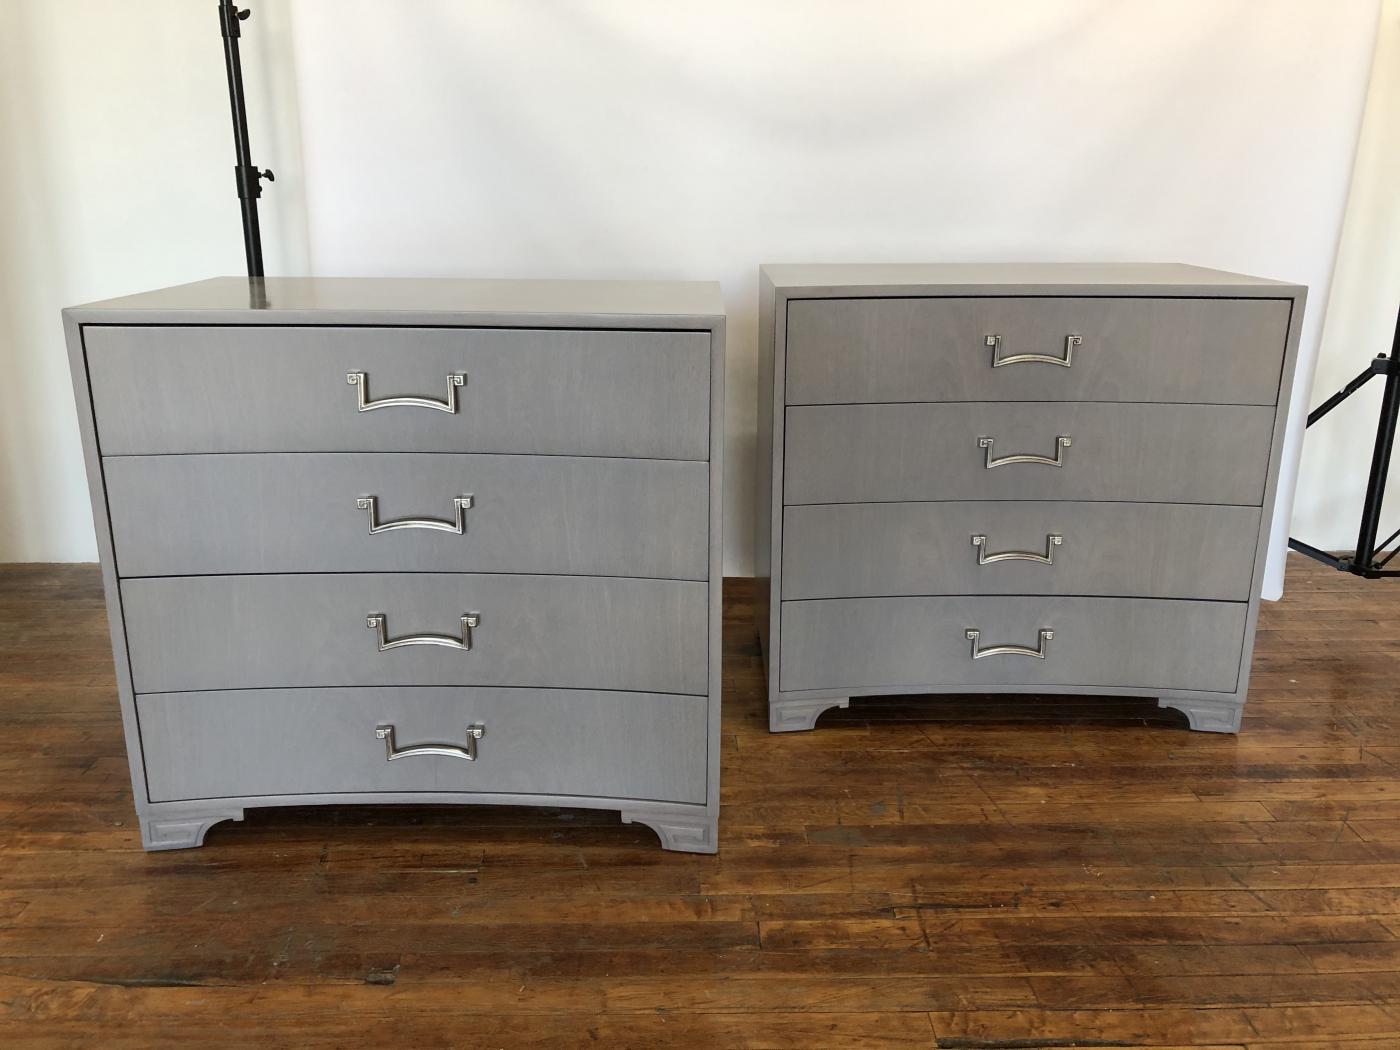 Pair of Modernist Dressers. Designed by Lorin Jackson for Grosfeld House.